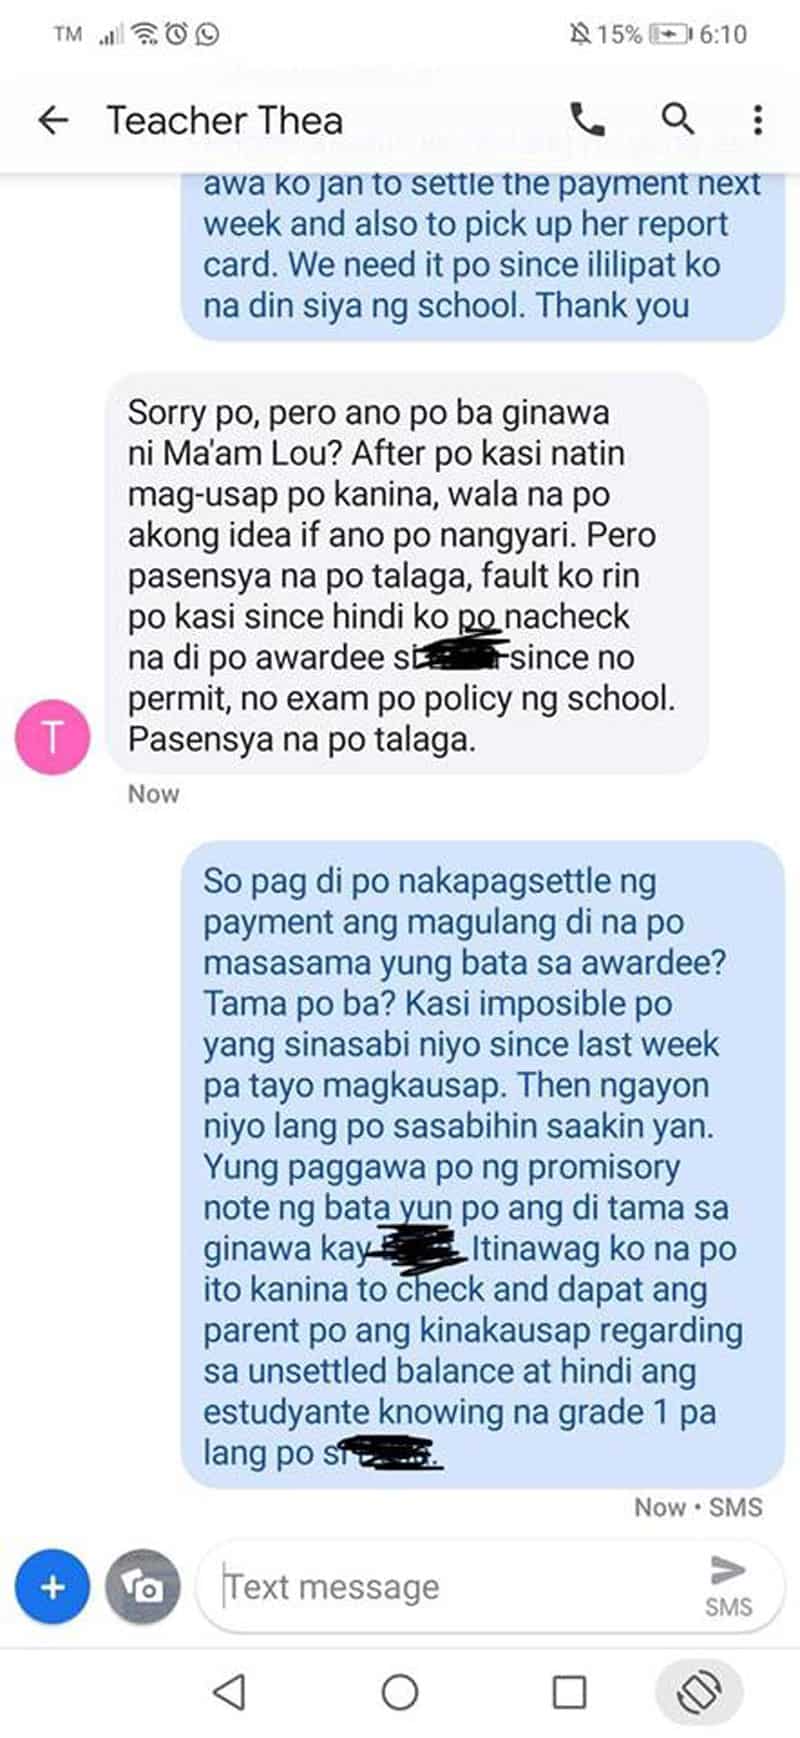 Grade 1 student with unpaid P3K account, ordered to write promissory note, removed from list of awardees